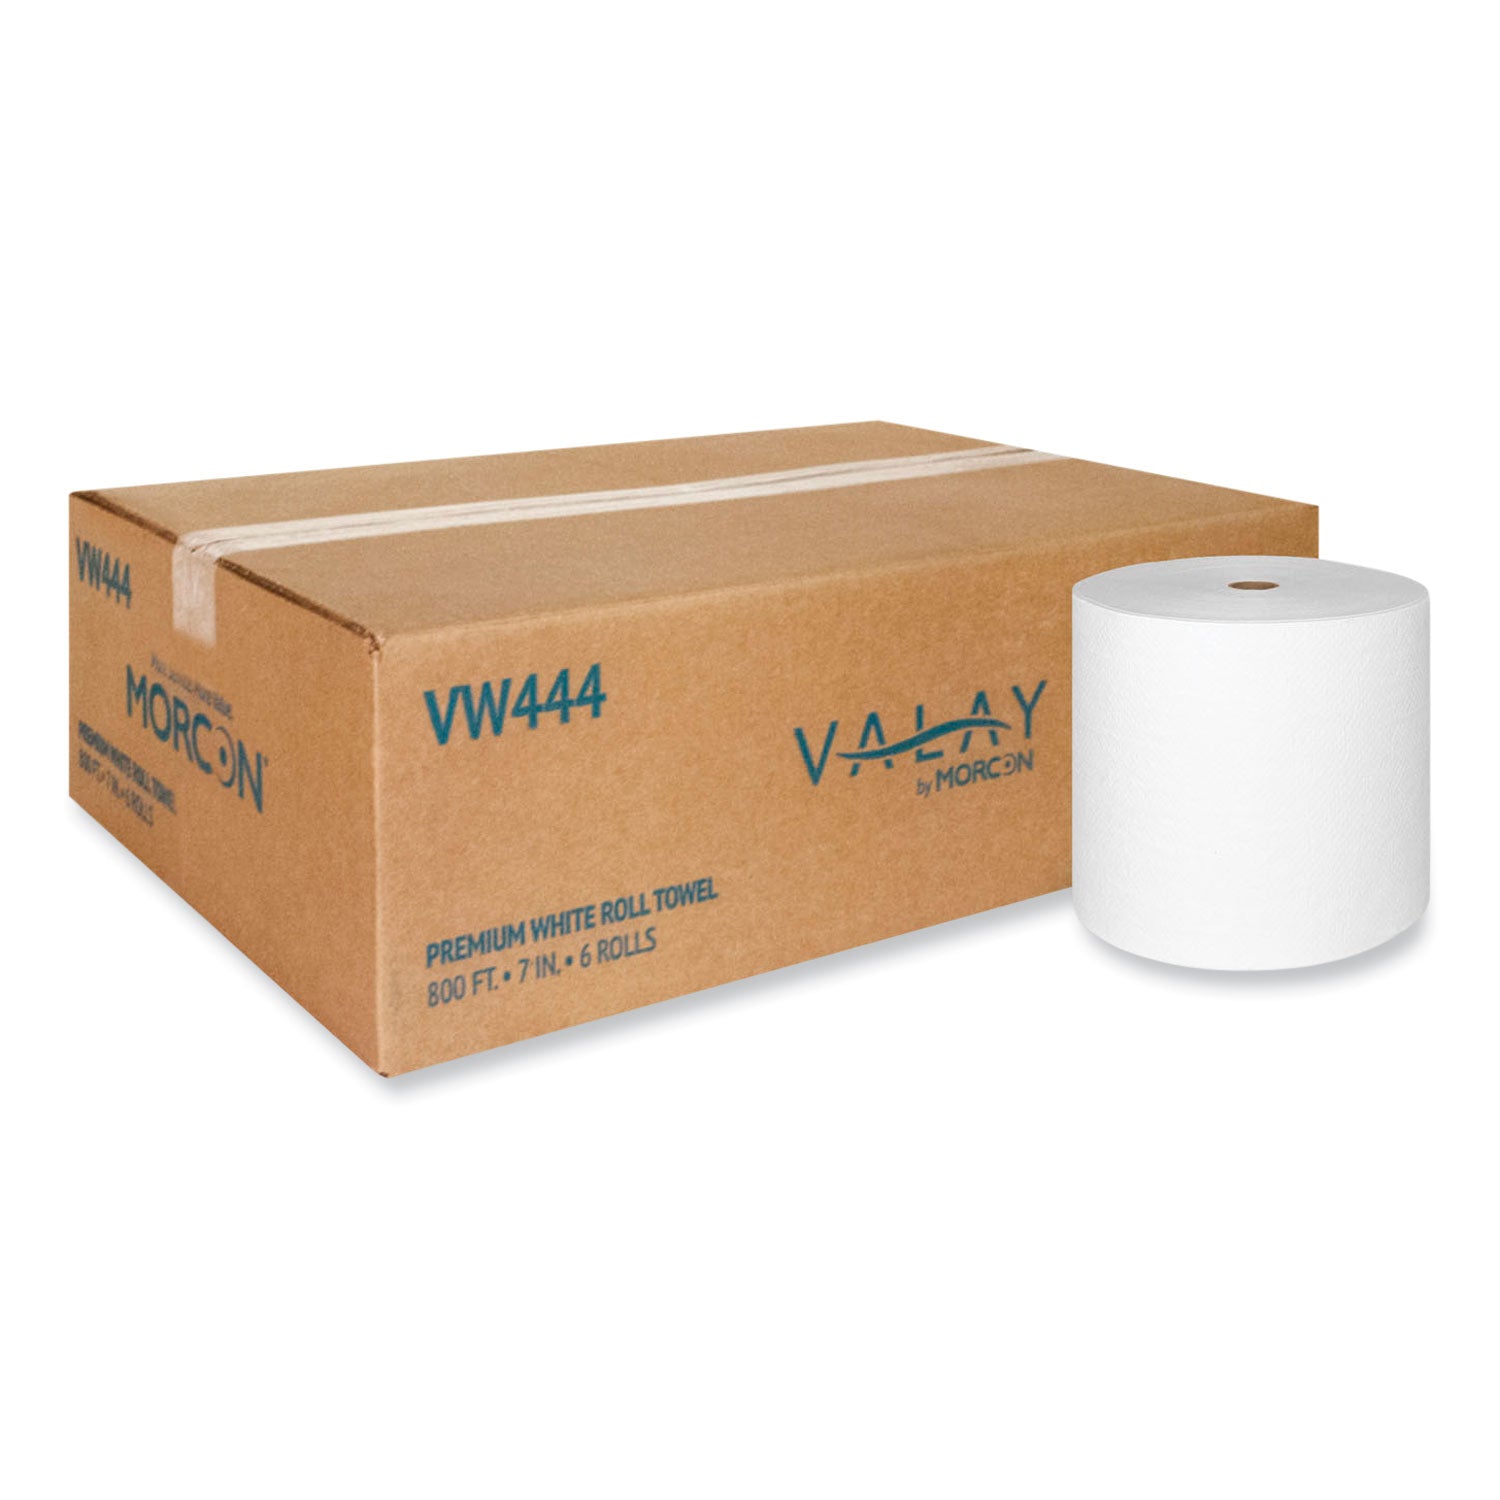 valay-proprietary-roll-towels-1-ply-7-x-800-ft-white-6-rolls-carton_morvw444 - 2